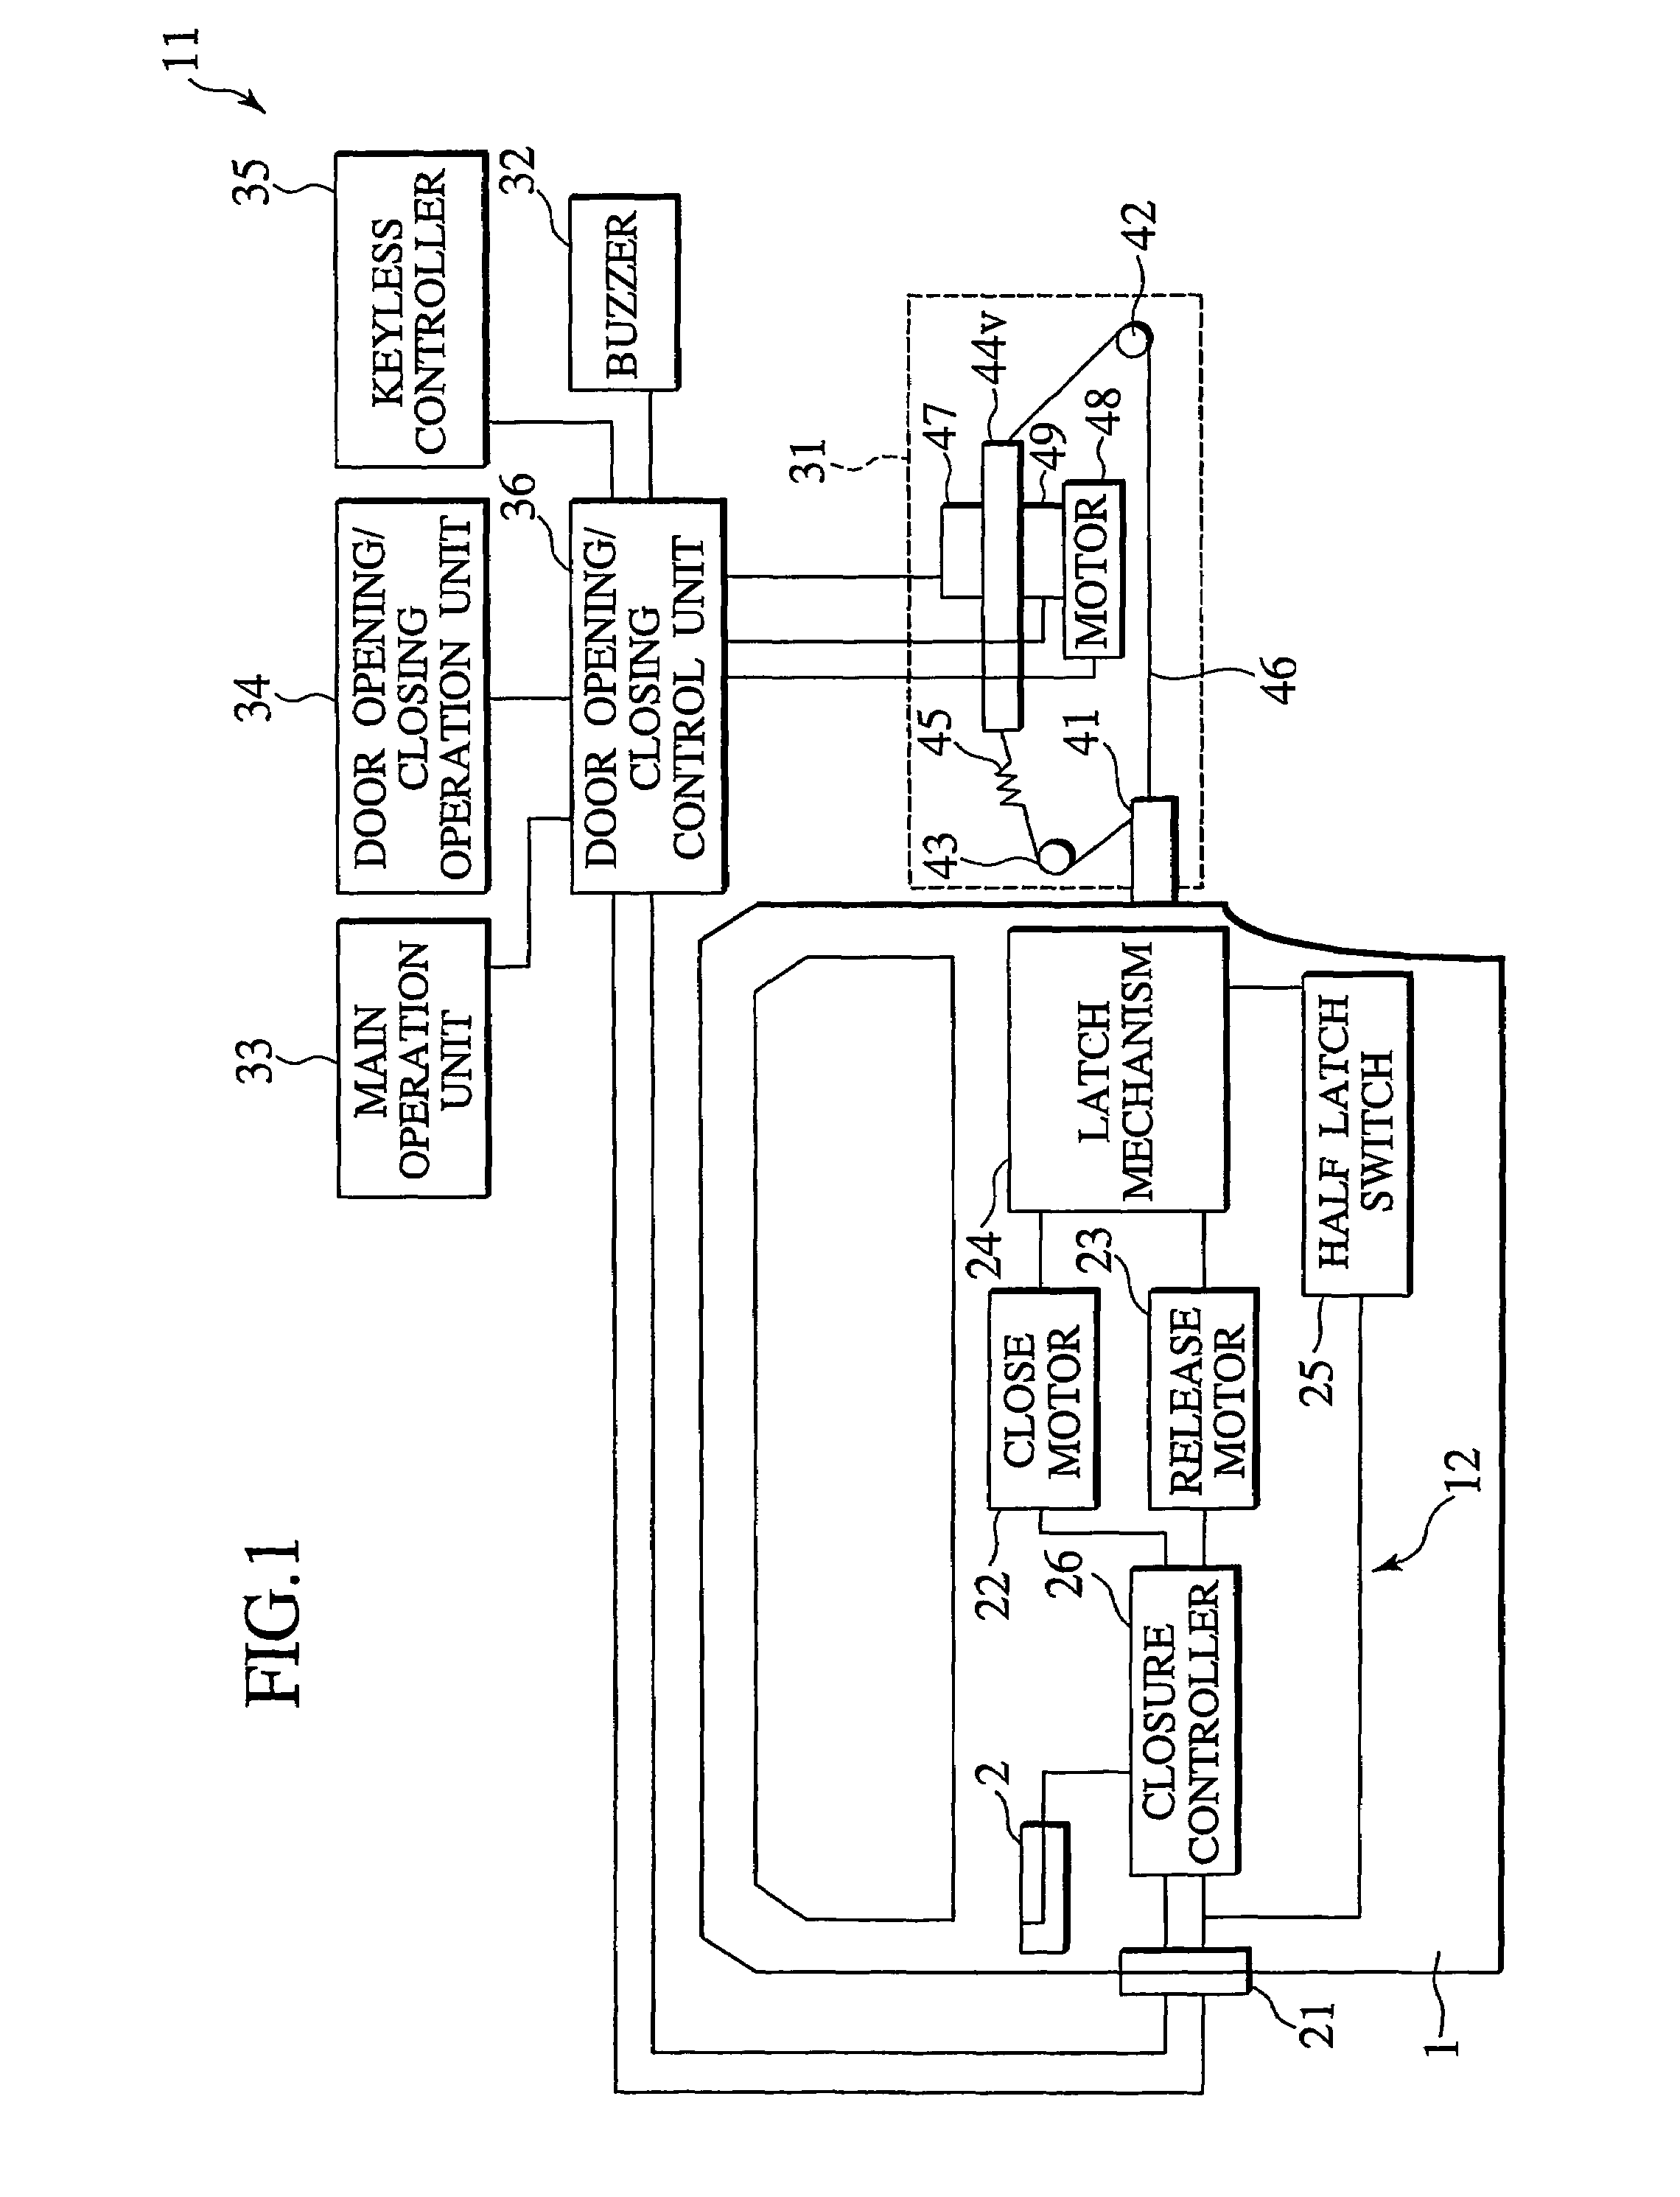 Control device for vehicular opening/closing body